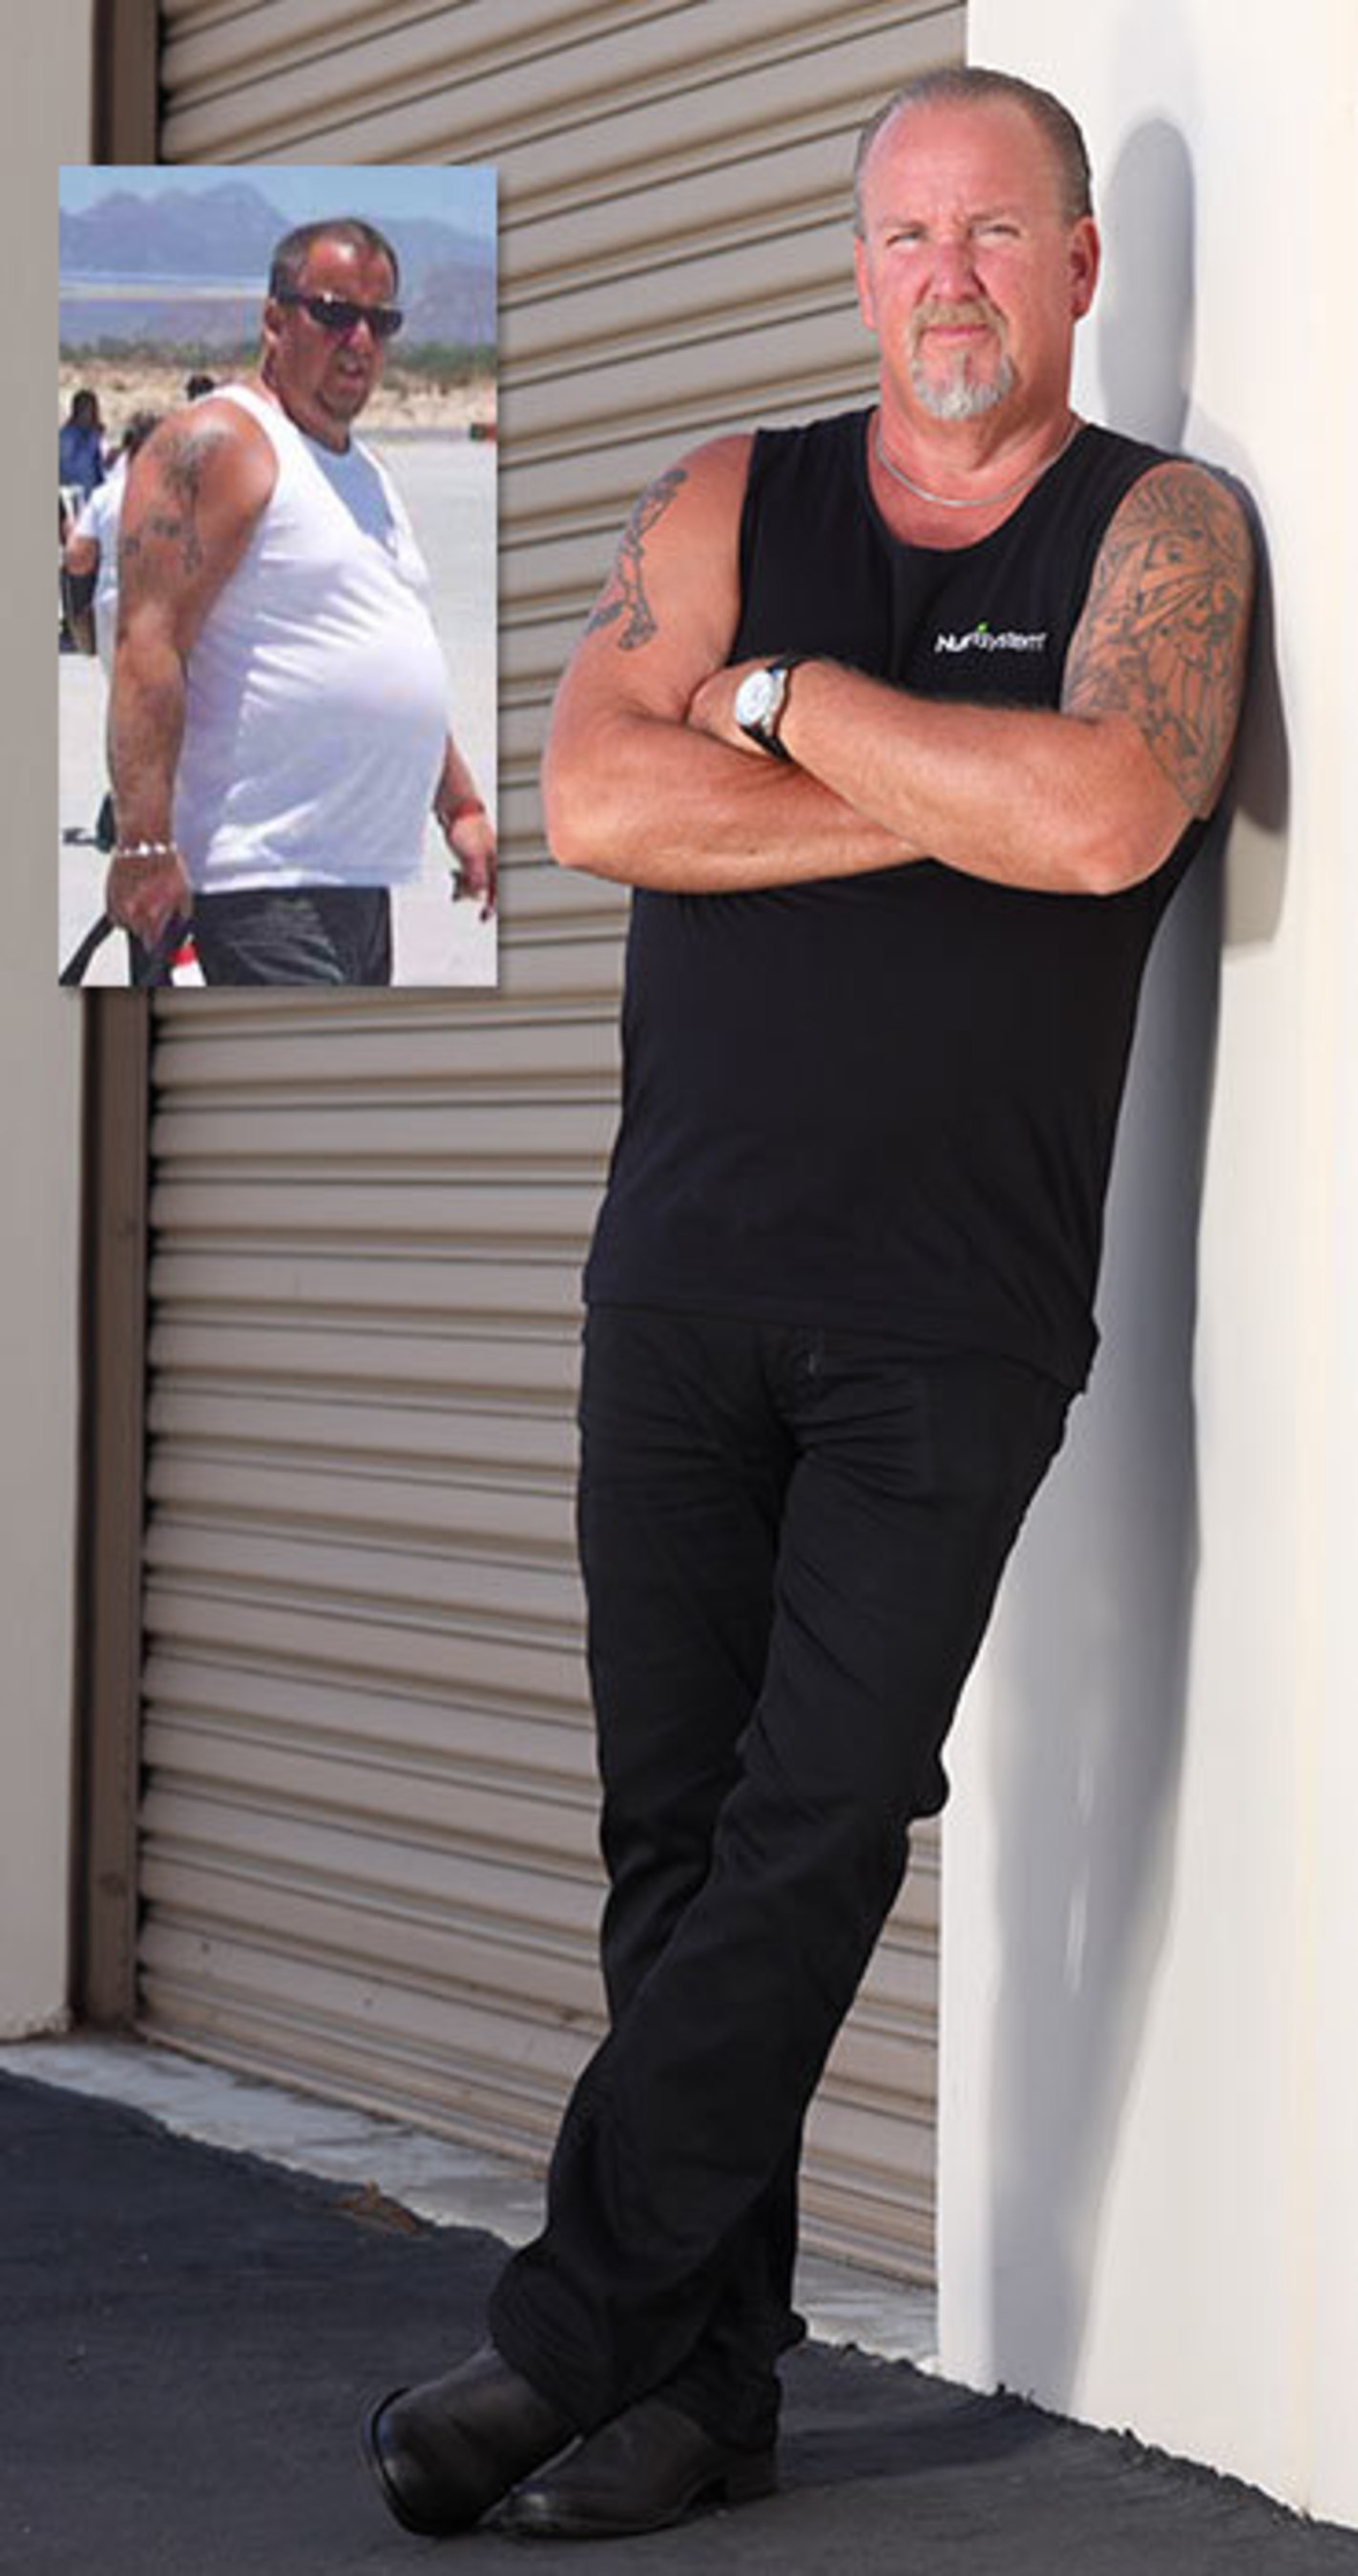 Reality star Darrell Sheets recently revealed that he has lost 40 pounds thanks to Nutrisystem. (PRNewsFoto/Nutrisystem, Inc.)